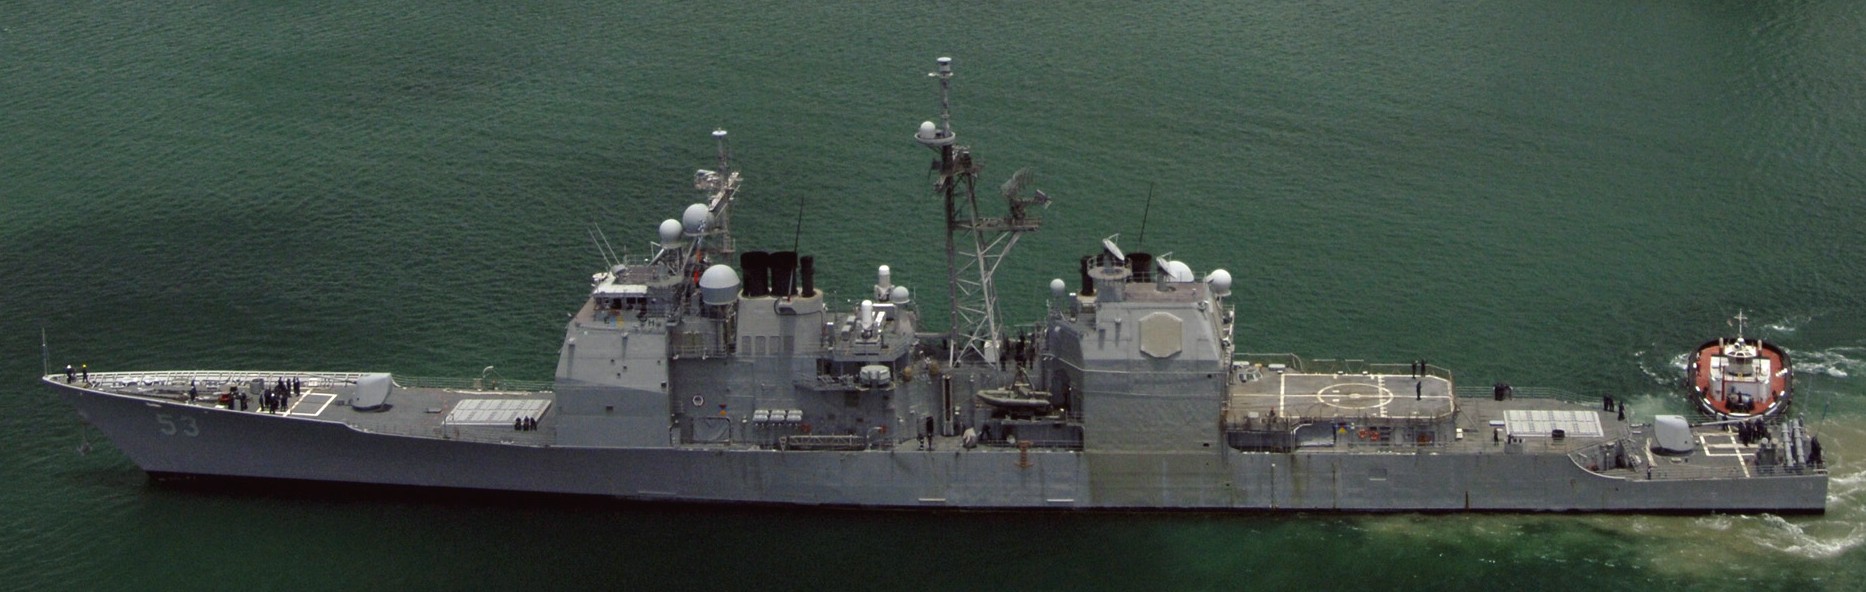 cg-53 uss mobile bay ticonderoga class guided missile cruiser aegis us navy 36